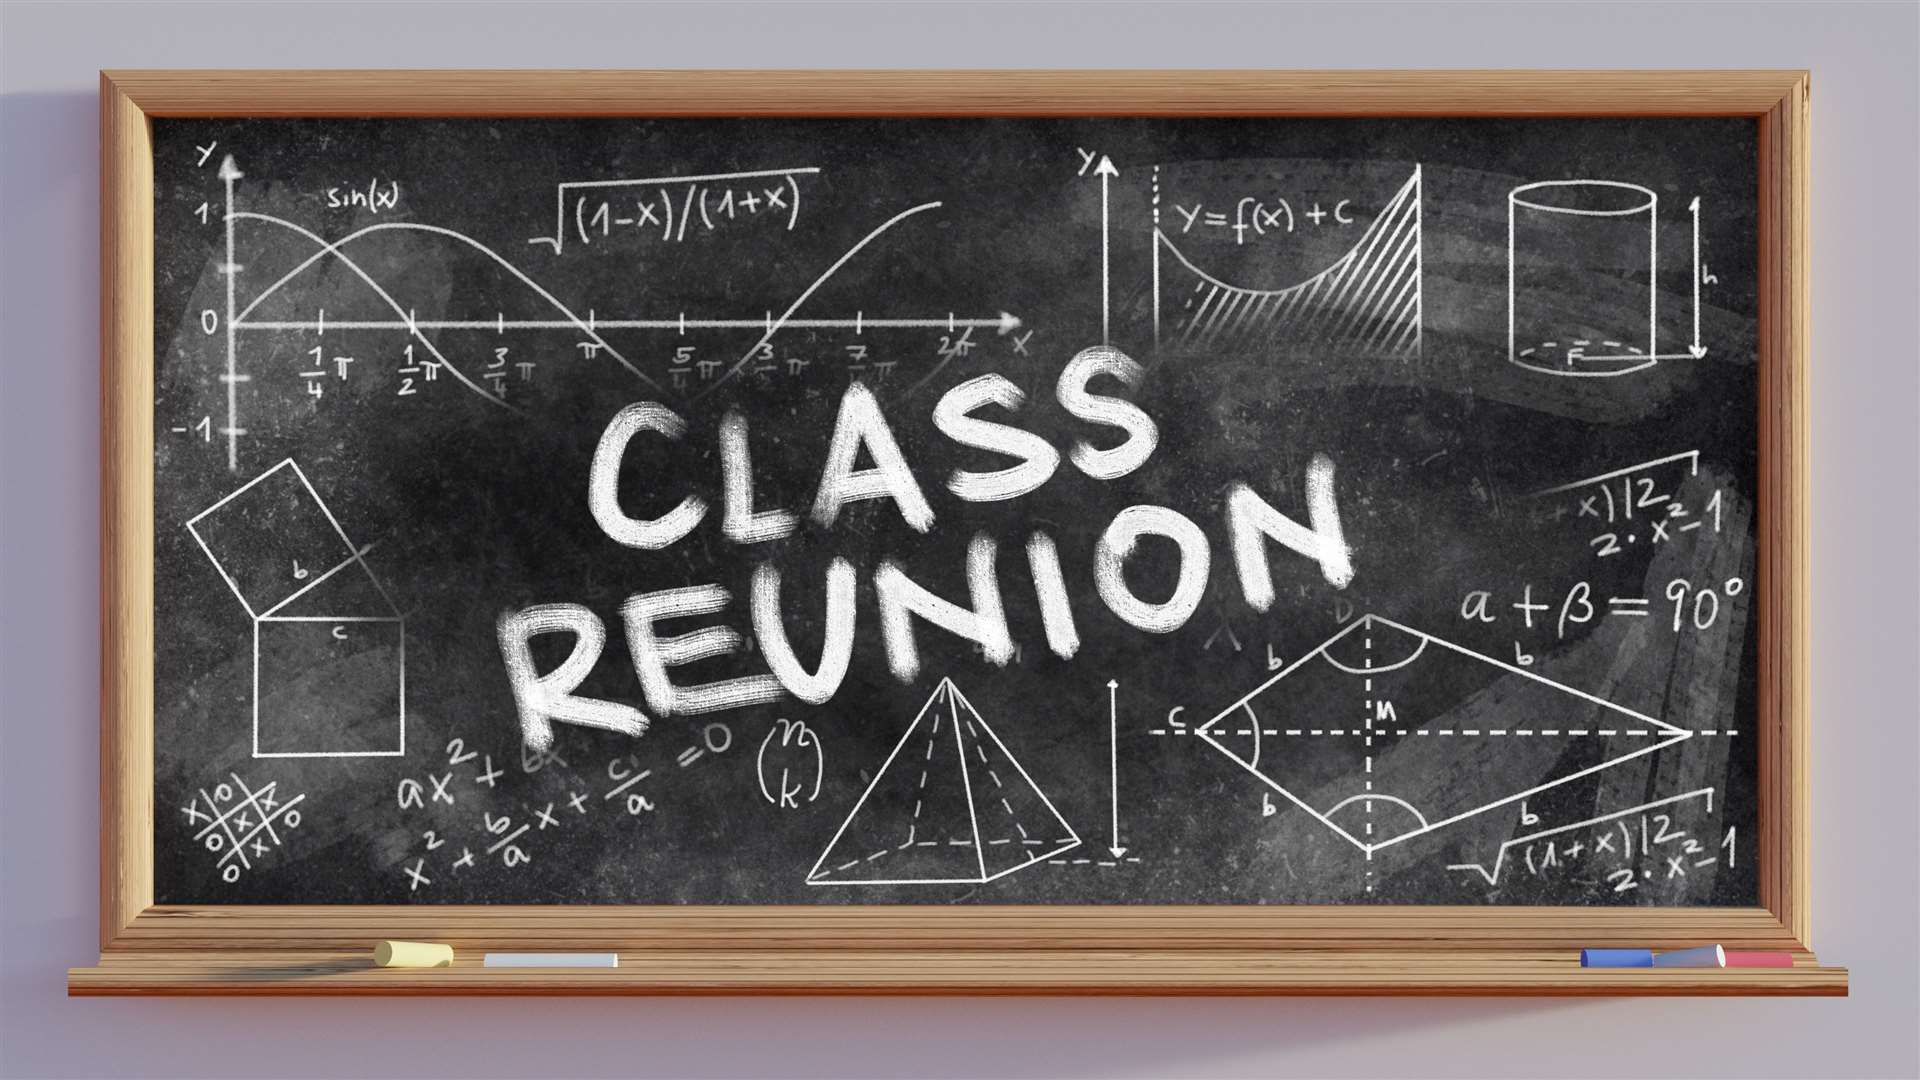 The reunion has been scheduled to take place on Saturday, September 30